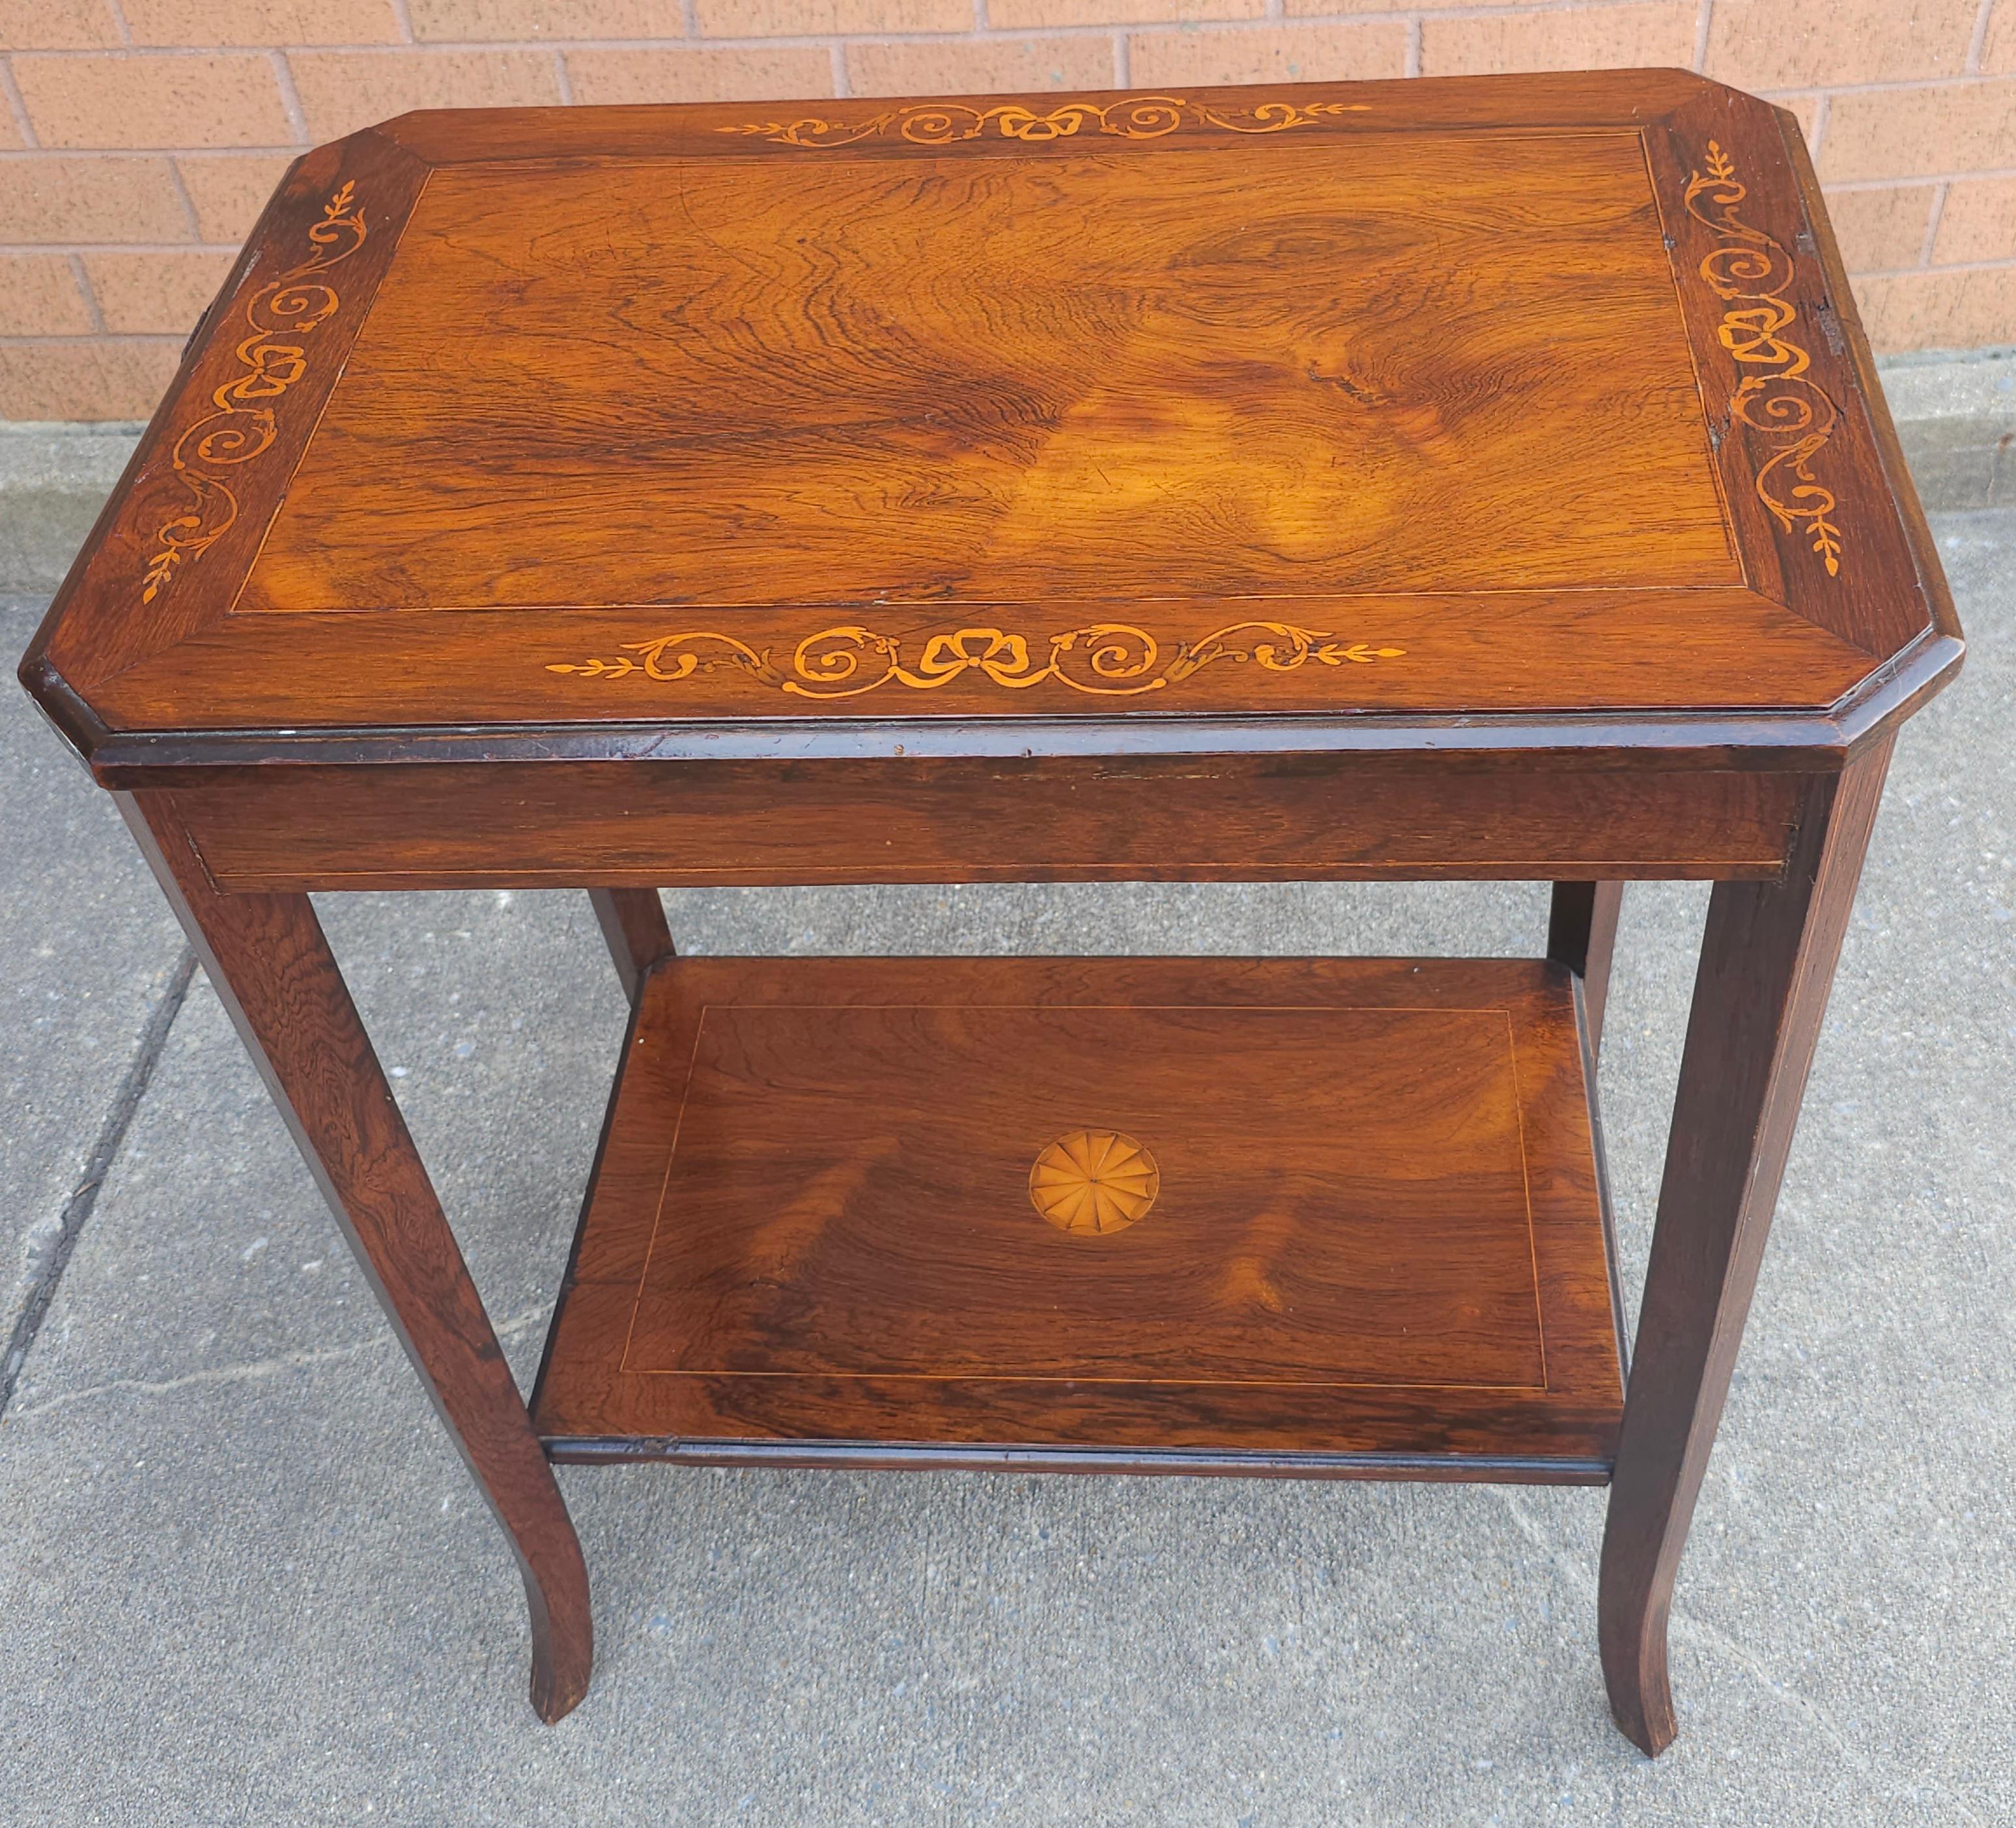 Early 20th C. Edwardian Rosewood Marquetry Inlaid  Side Table In Good Condition For Sale In Germantown, MD